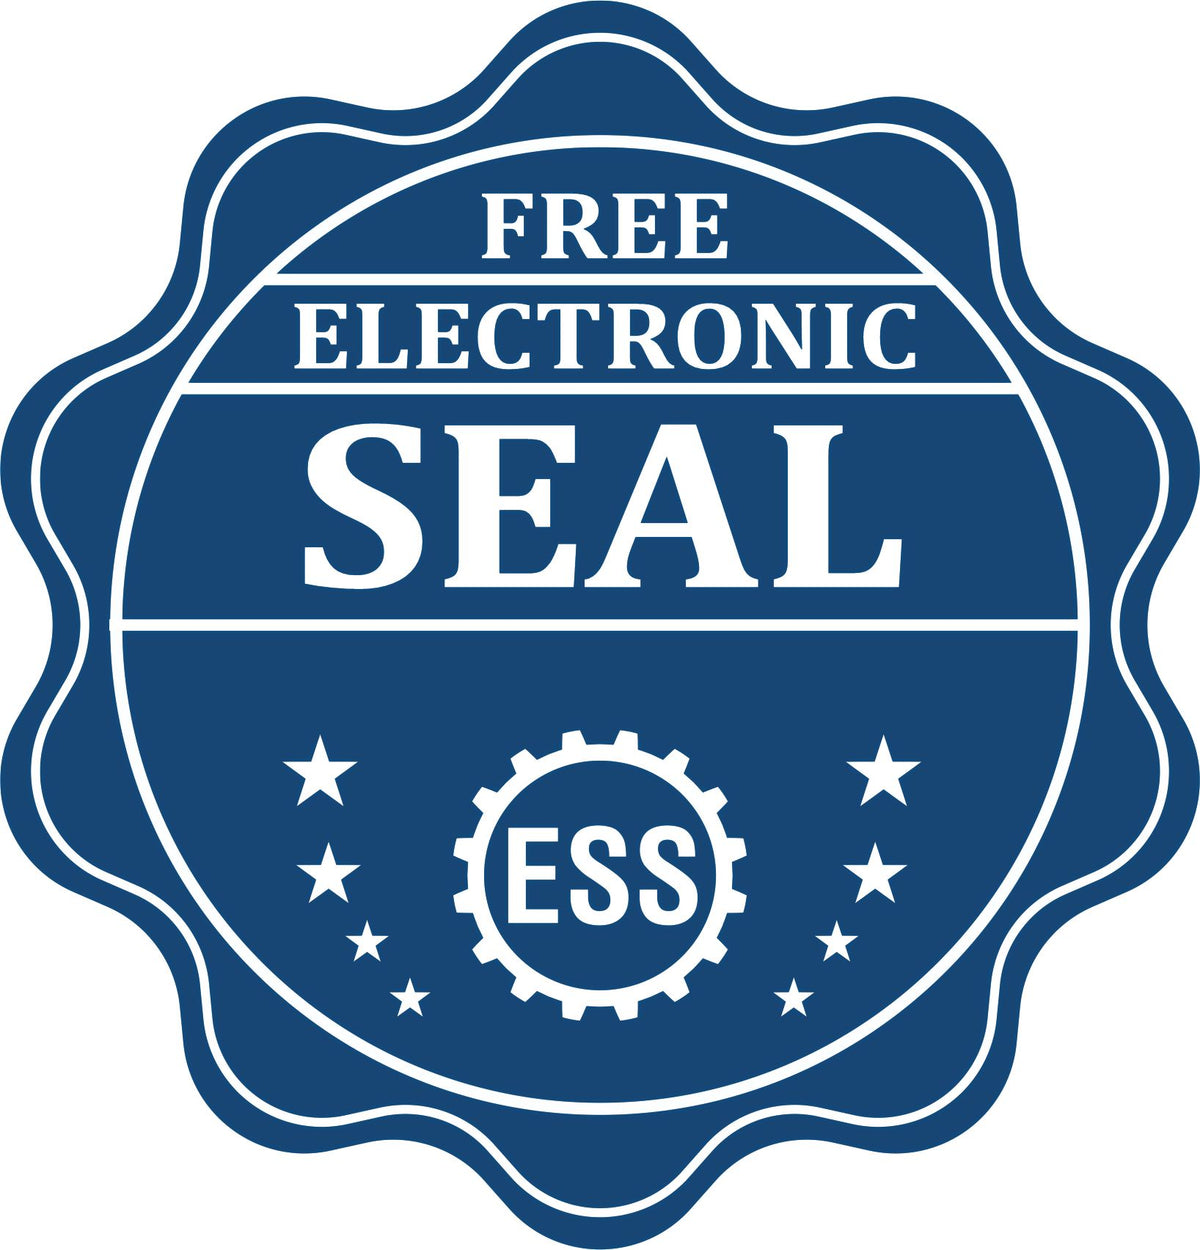 A badge showing a free electronic seal for the Slim Pre-Inked Maine Land Surveyor Seal Stamp with stars and the ESS gear on the emblem.